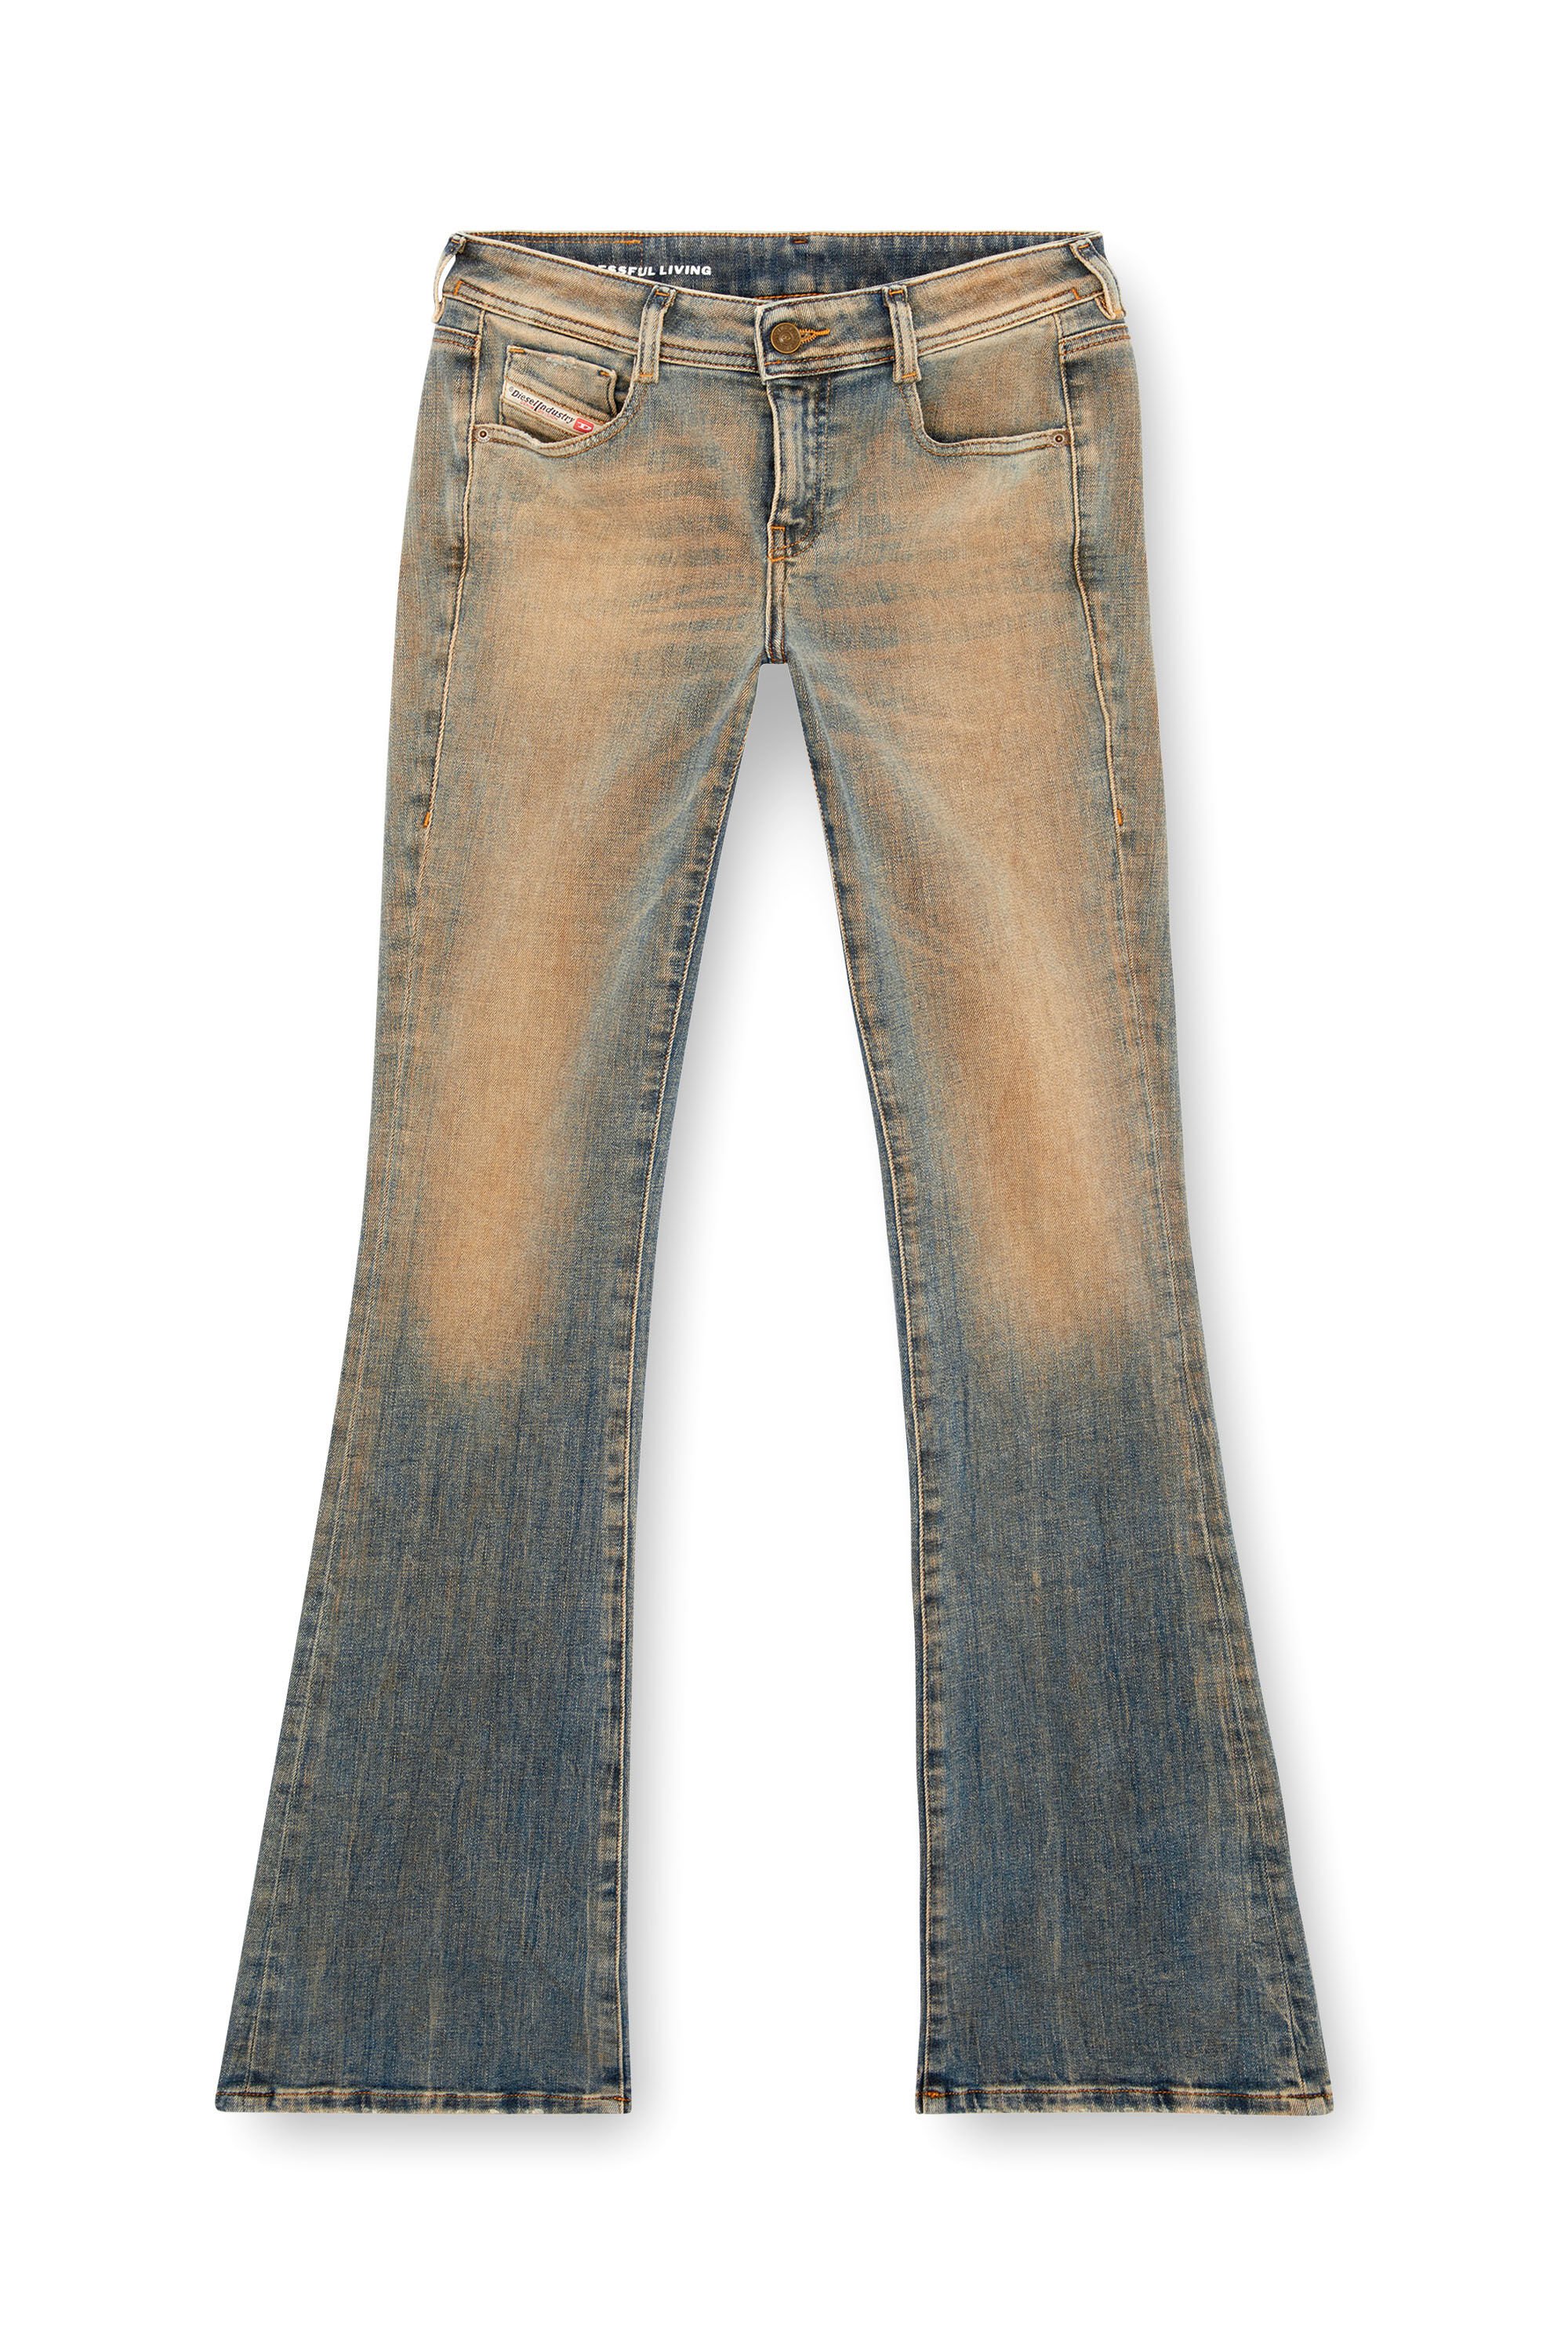 Diesel - Bootcut and Flare Jeans 1969 D-Ebbey 09J23, Mujer Bootcut y Flare Jeans - 1969 D-Ebbey in Azul marino - Image 2